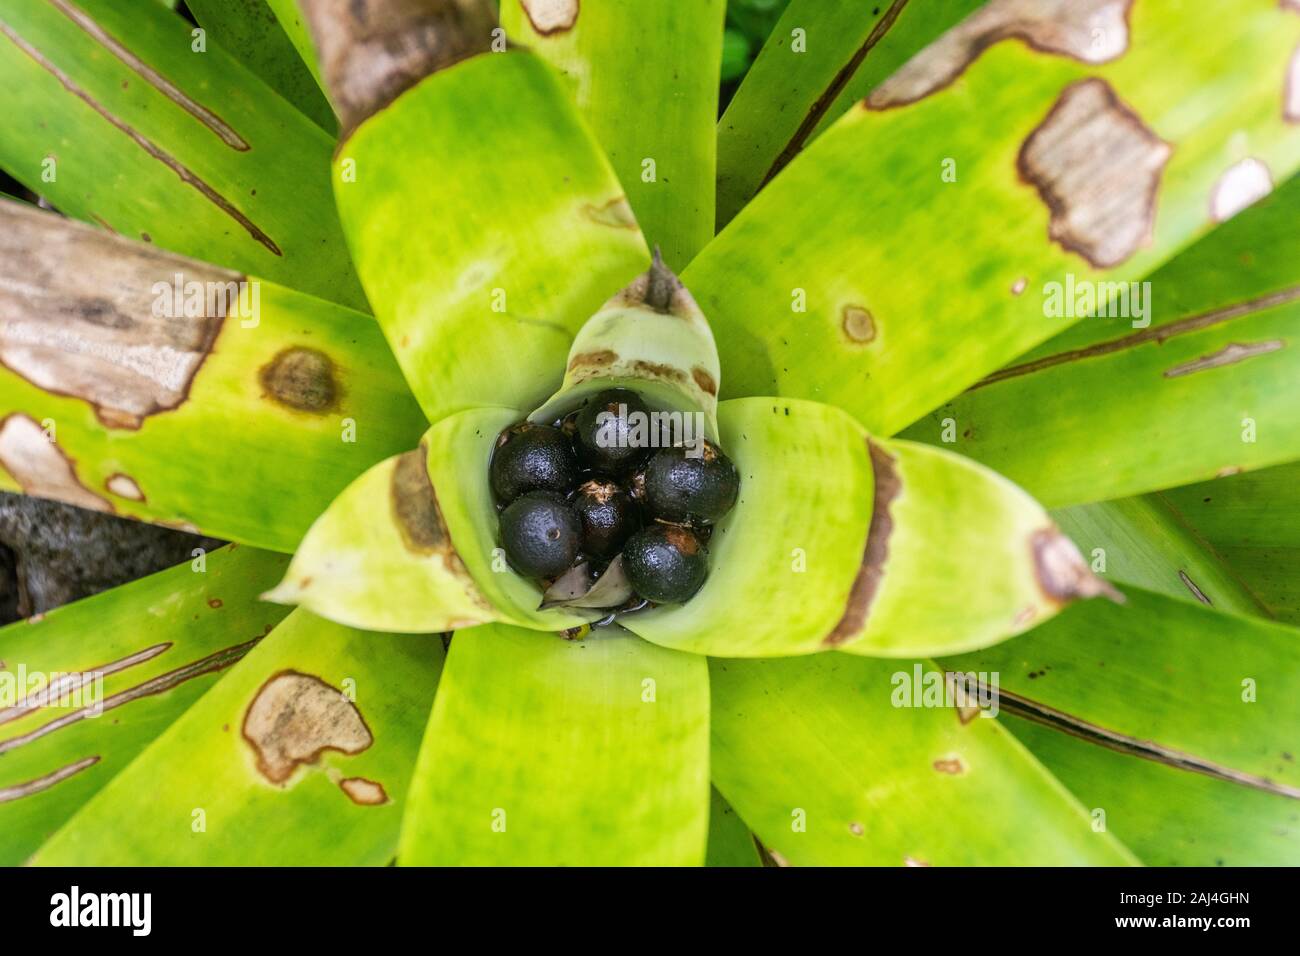 Bromeliad plant seen from above with jussara coconuts inside, rainforest of Mantiqueira Mountains, Rio de Janeiro, Brazil Stock Photo